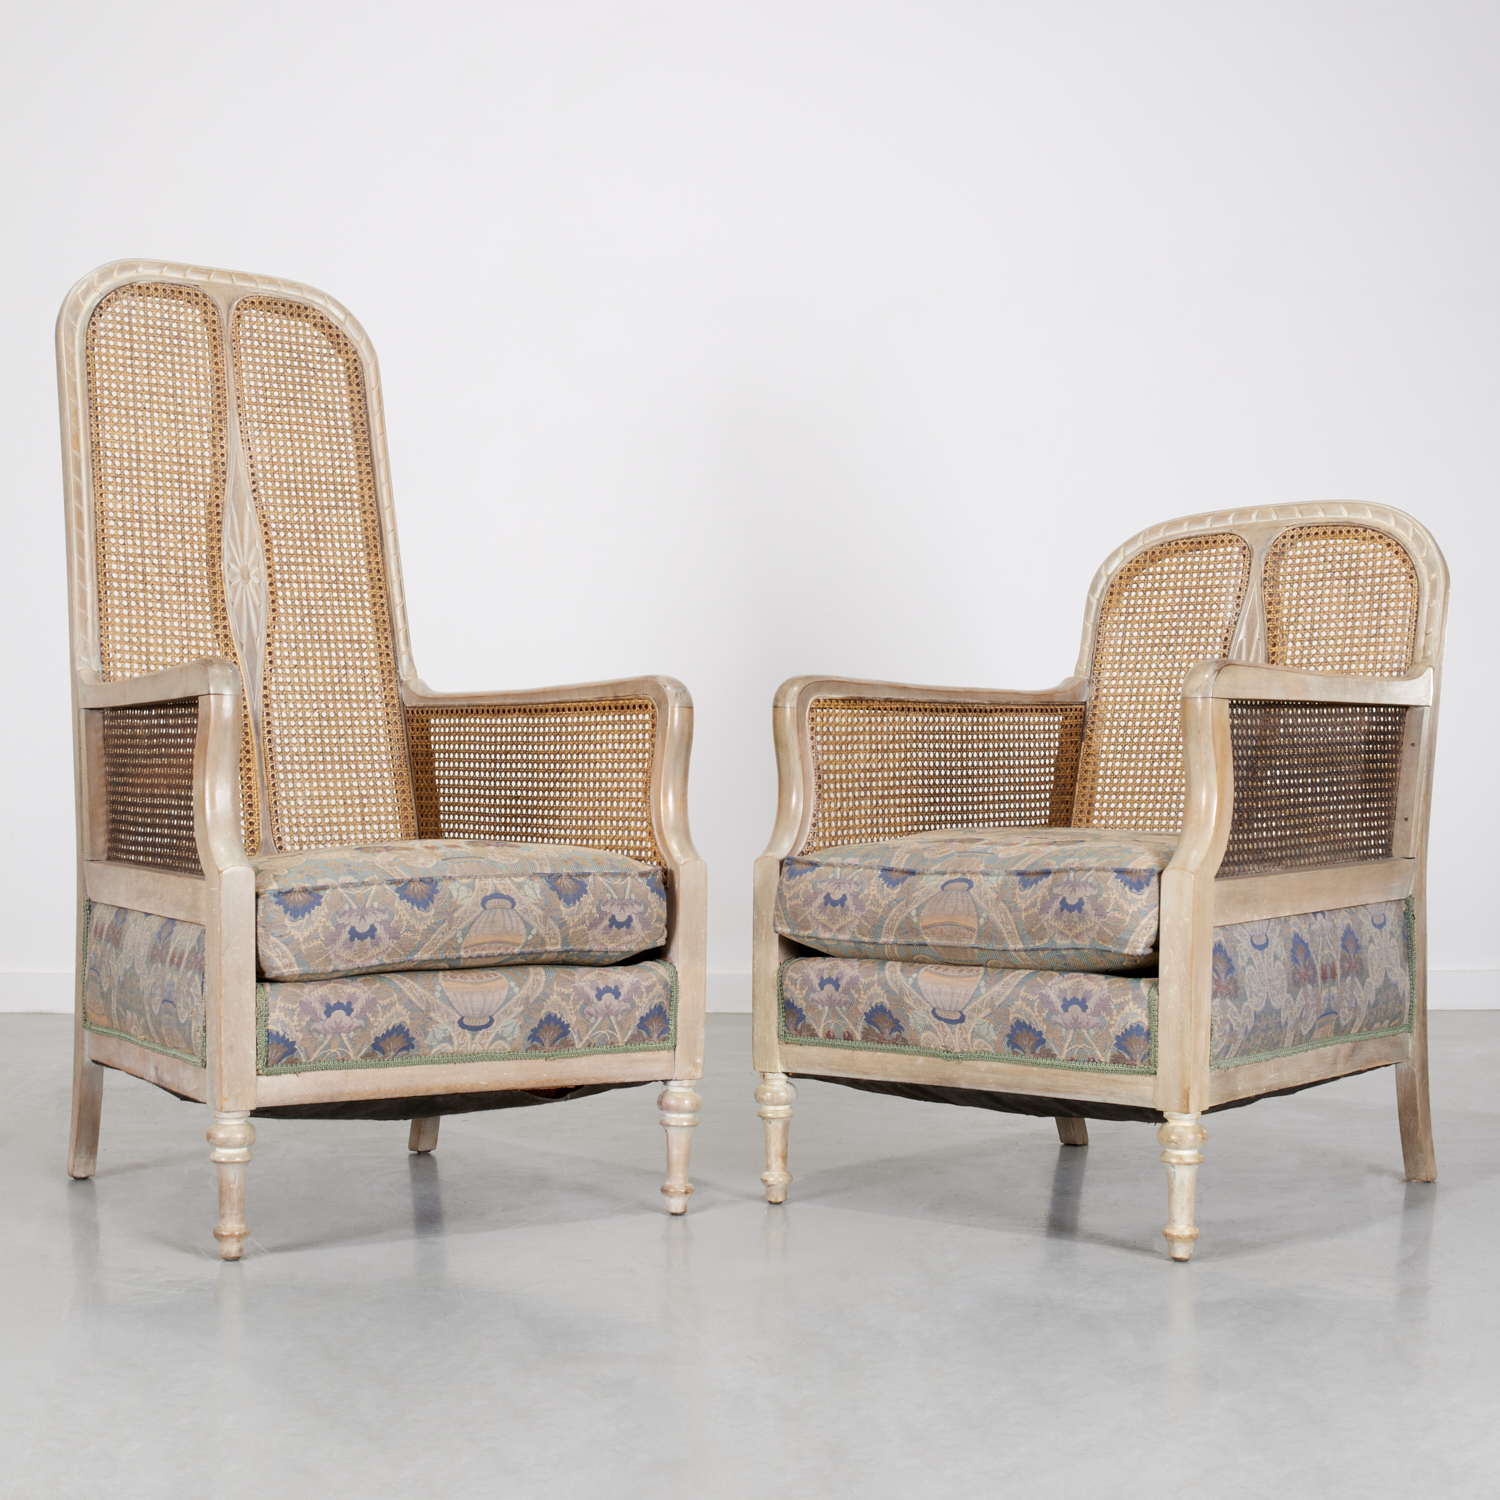 PAIR REGENCY STYLE HIS AND HERS  2fc510